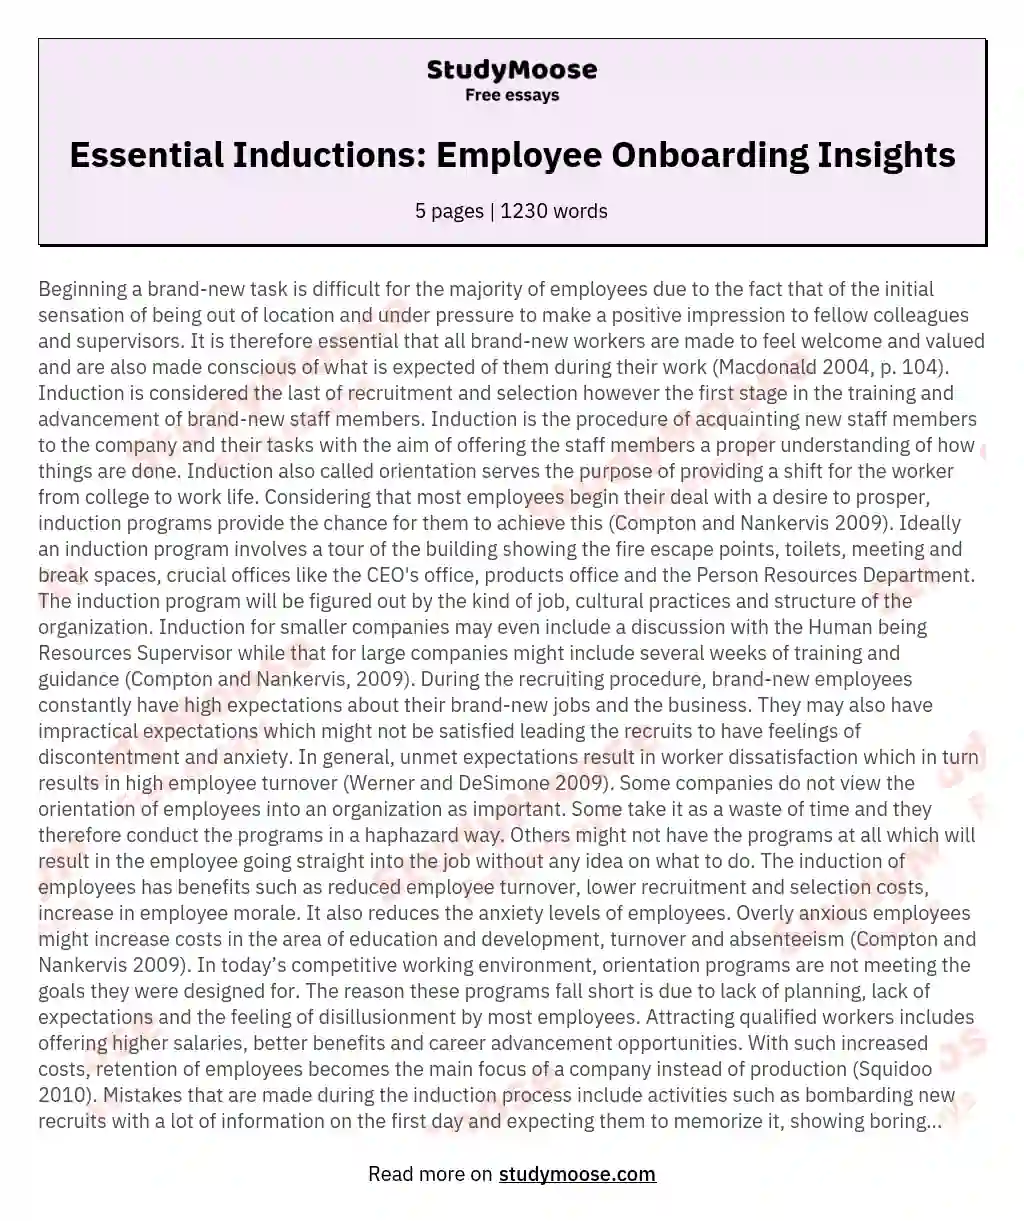 Essential Inductions: Employee Onboarding Insights essay